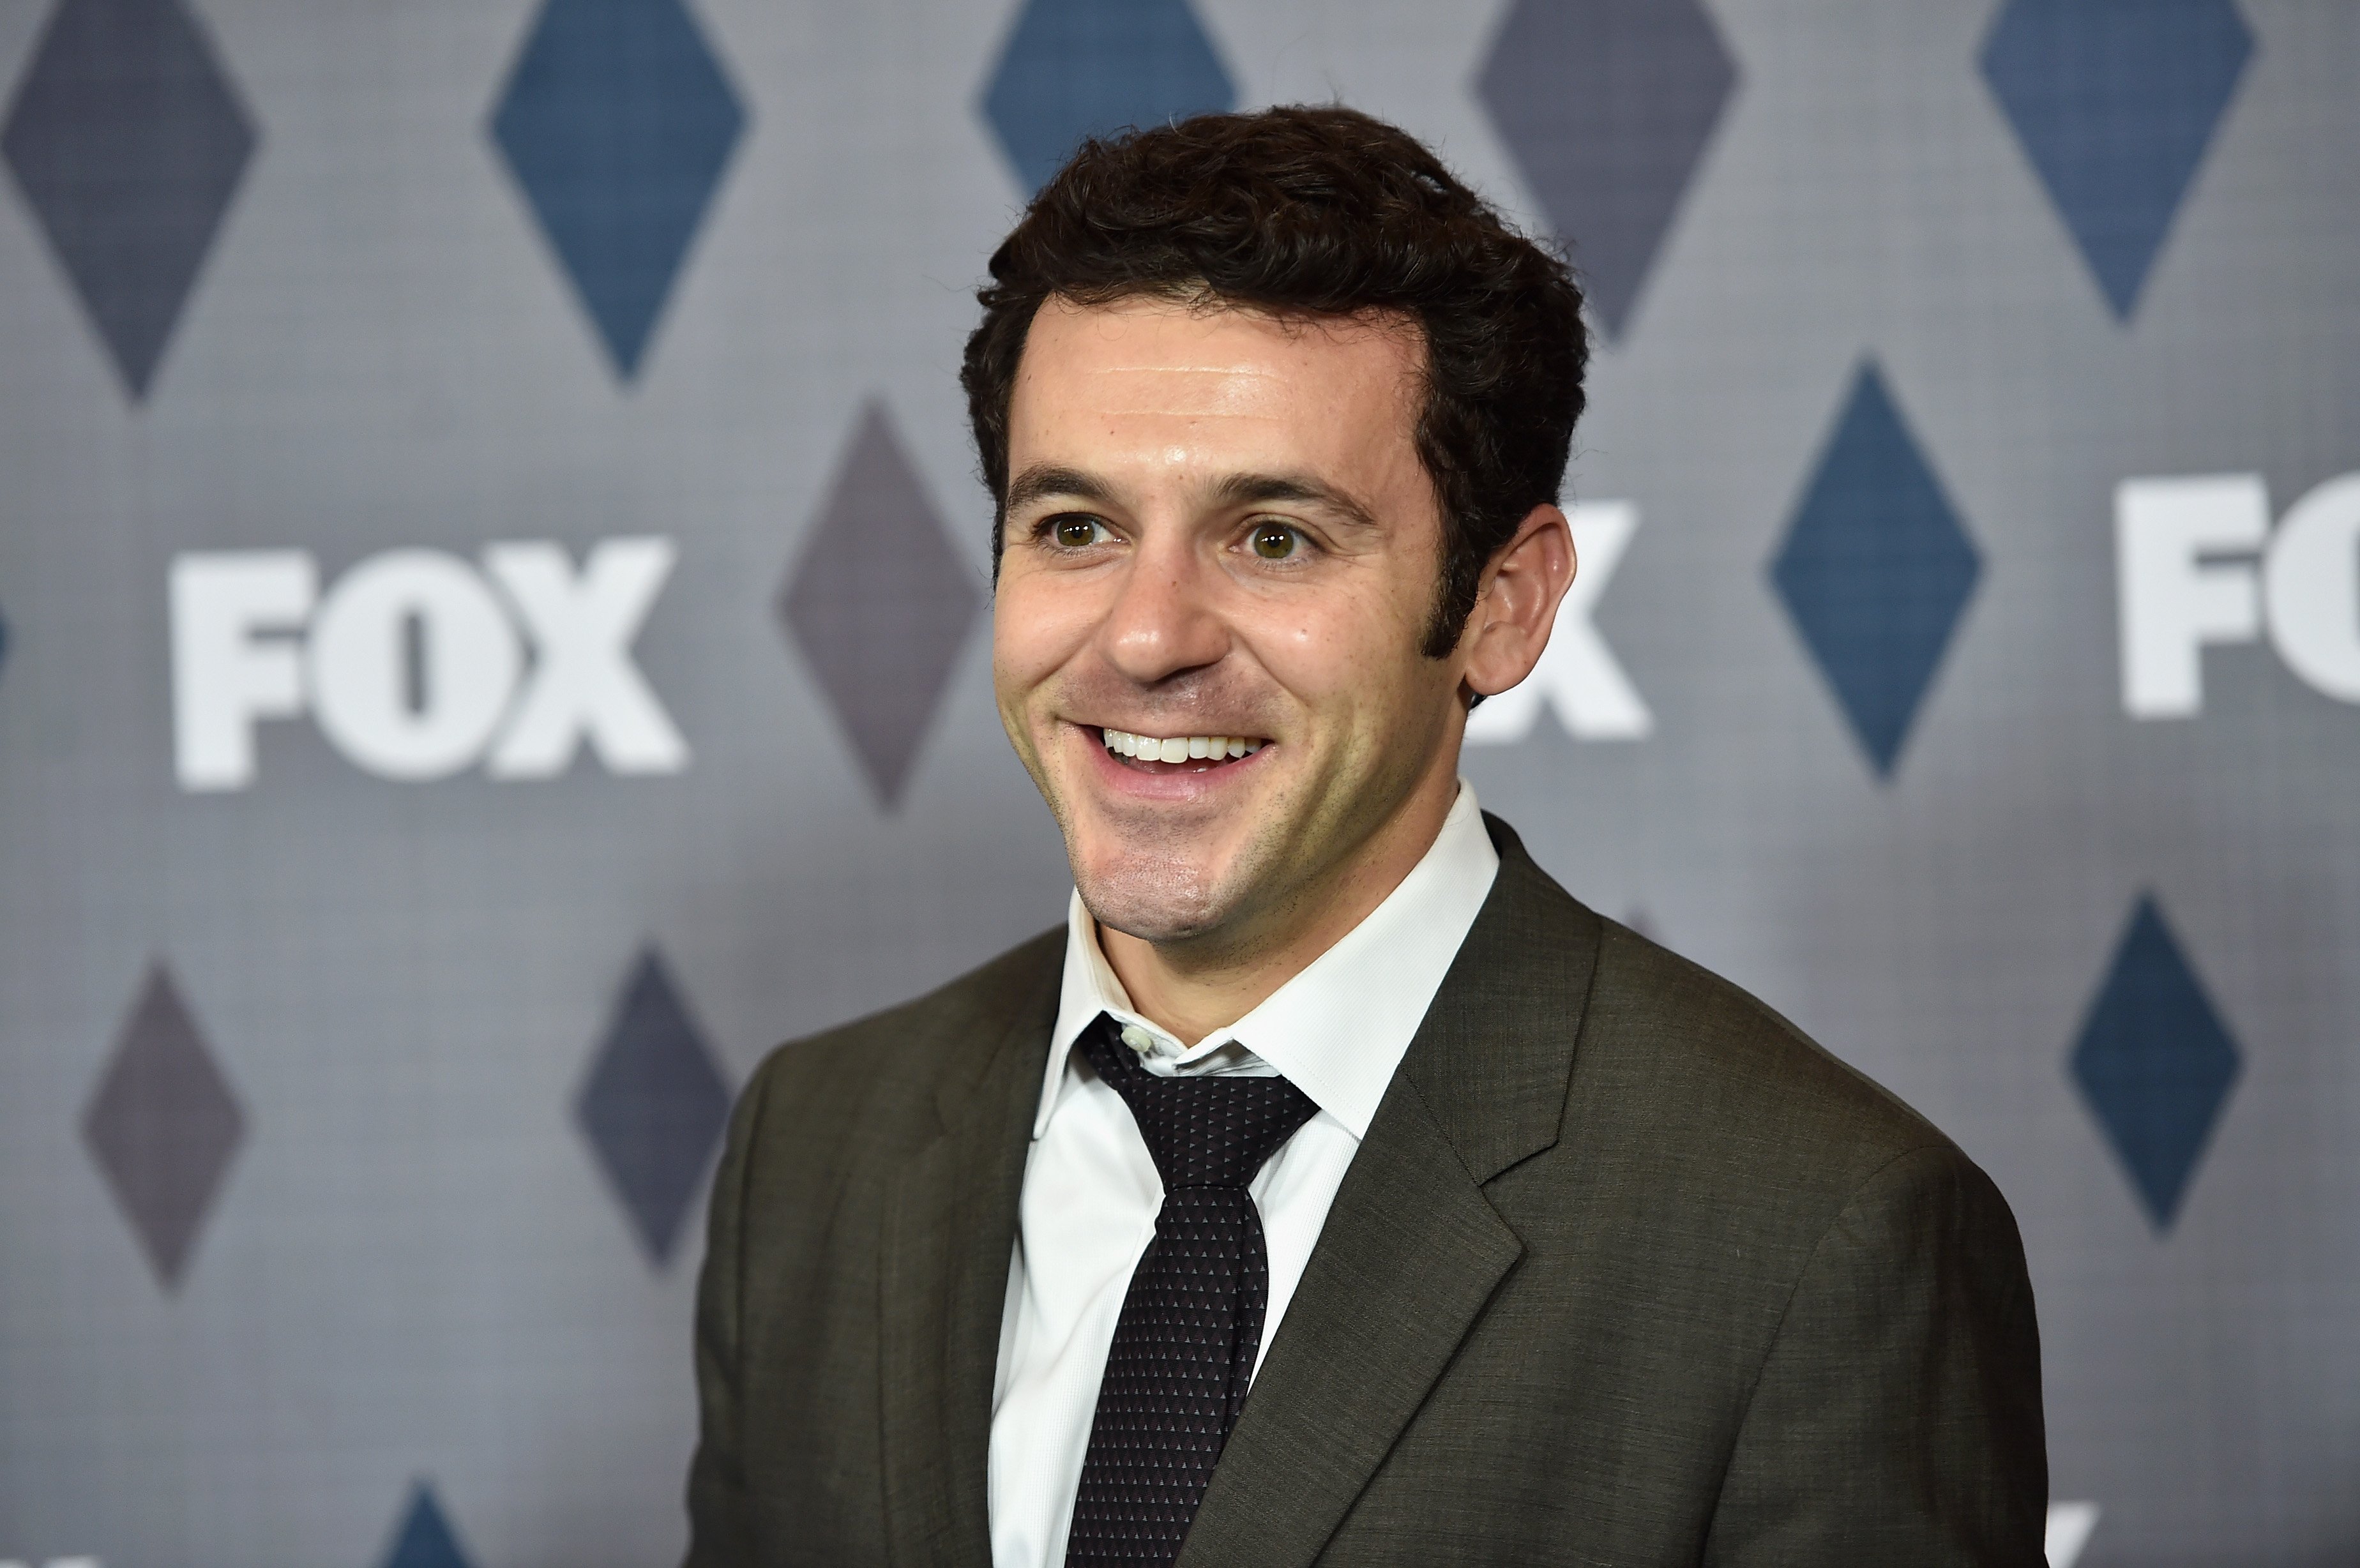 Fred Savage on January 15, 2016 in Pasadena, California | Source: Getty Images